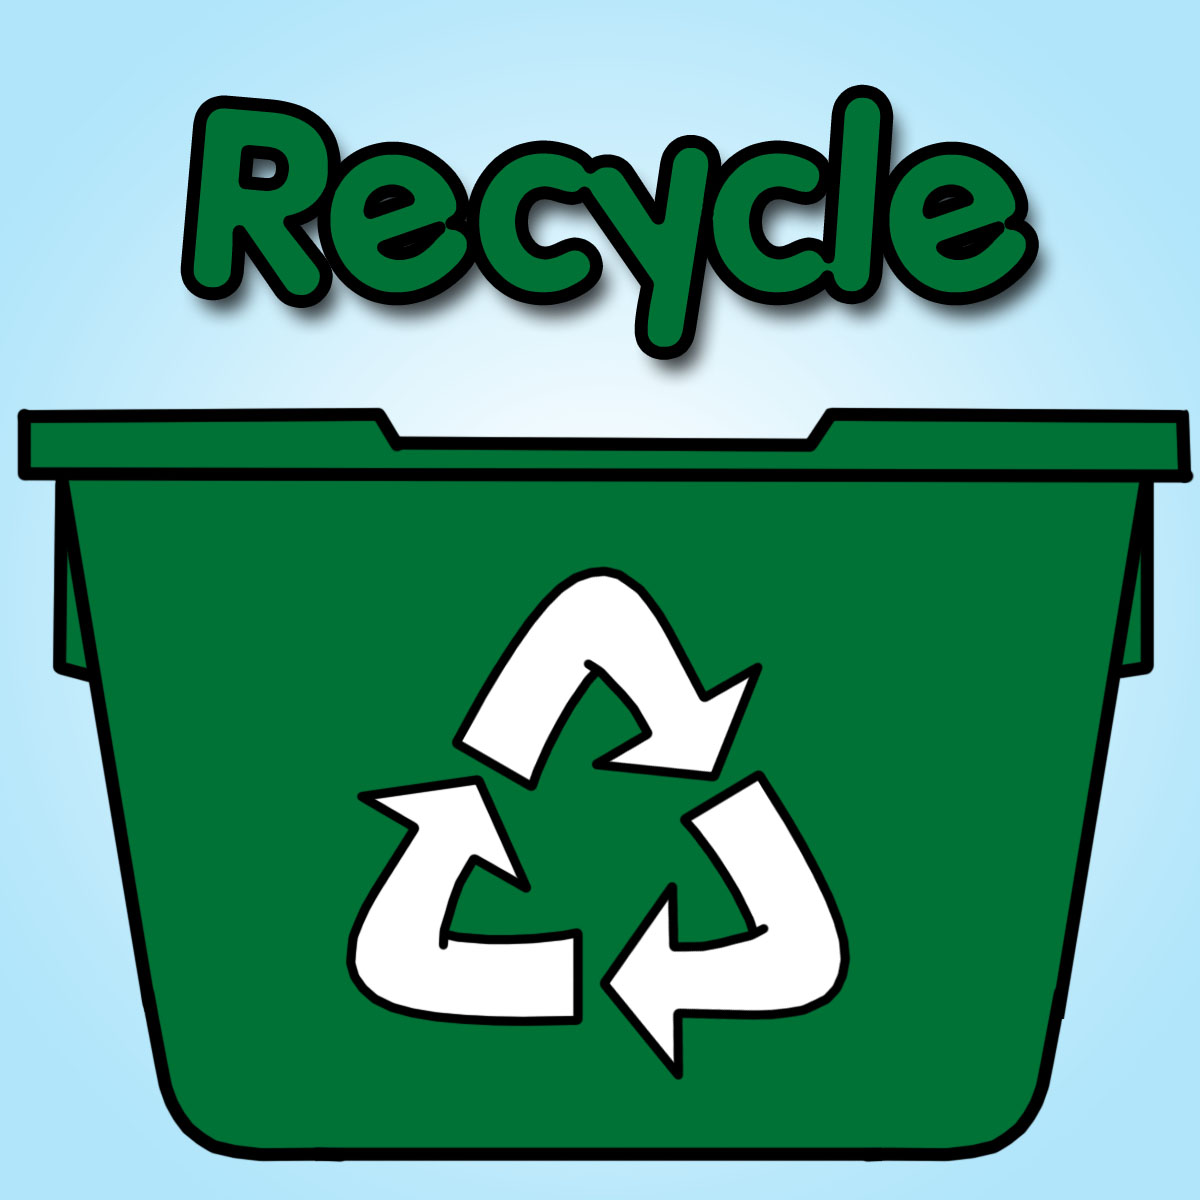 Recycle clipart kid